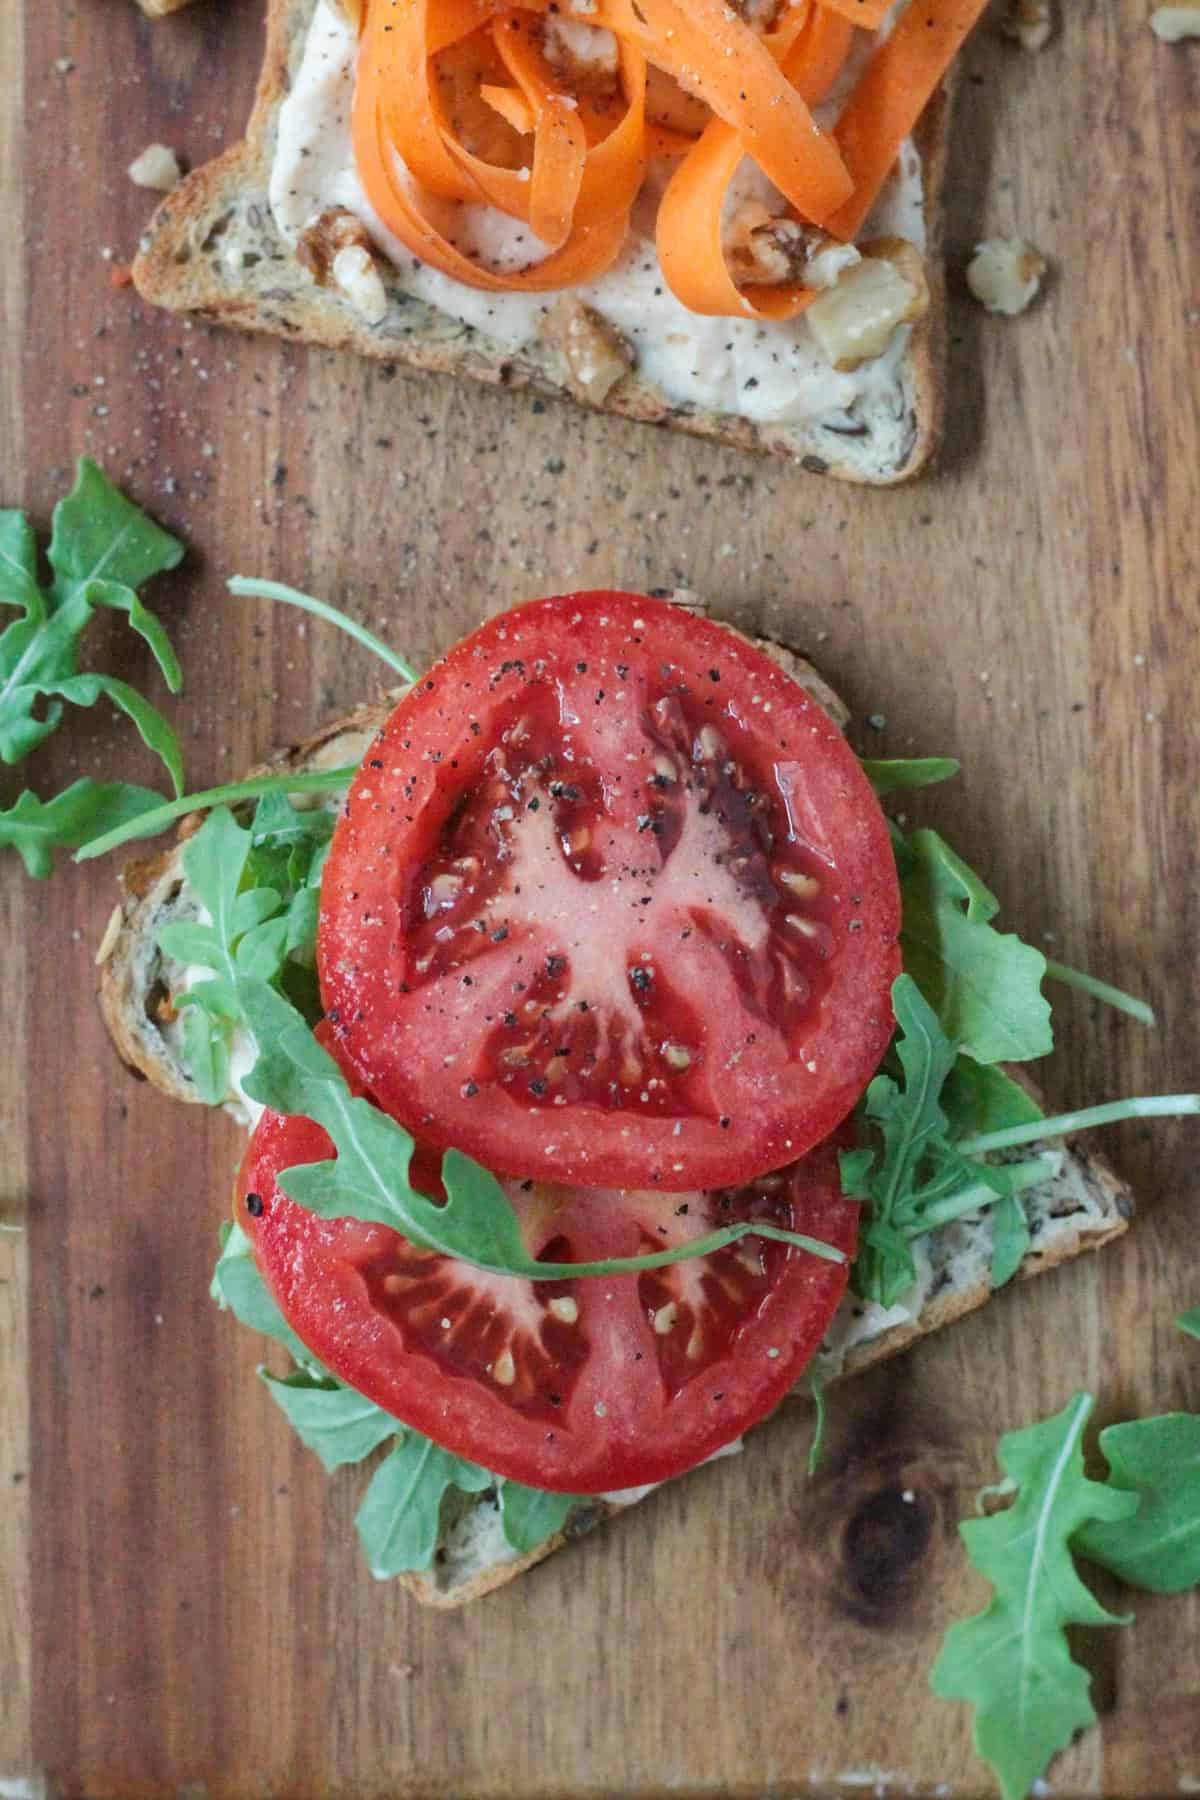 Hummus toast topped with two slices of tomato and arugula.